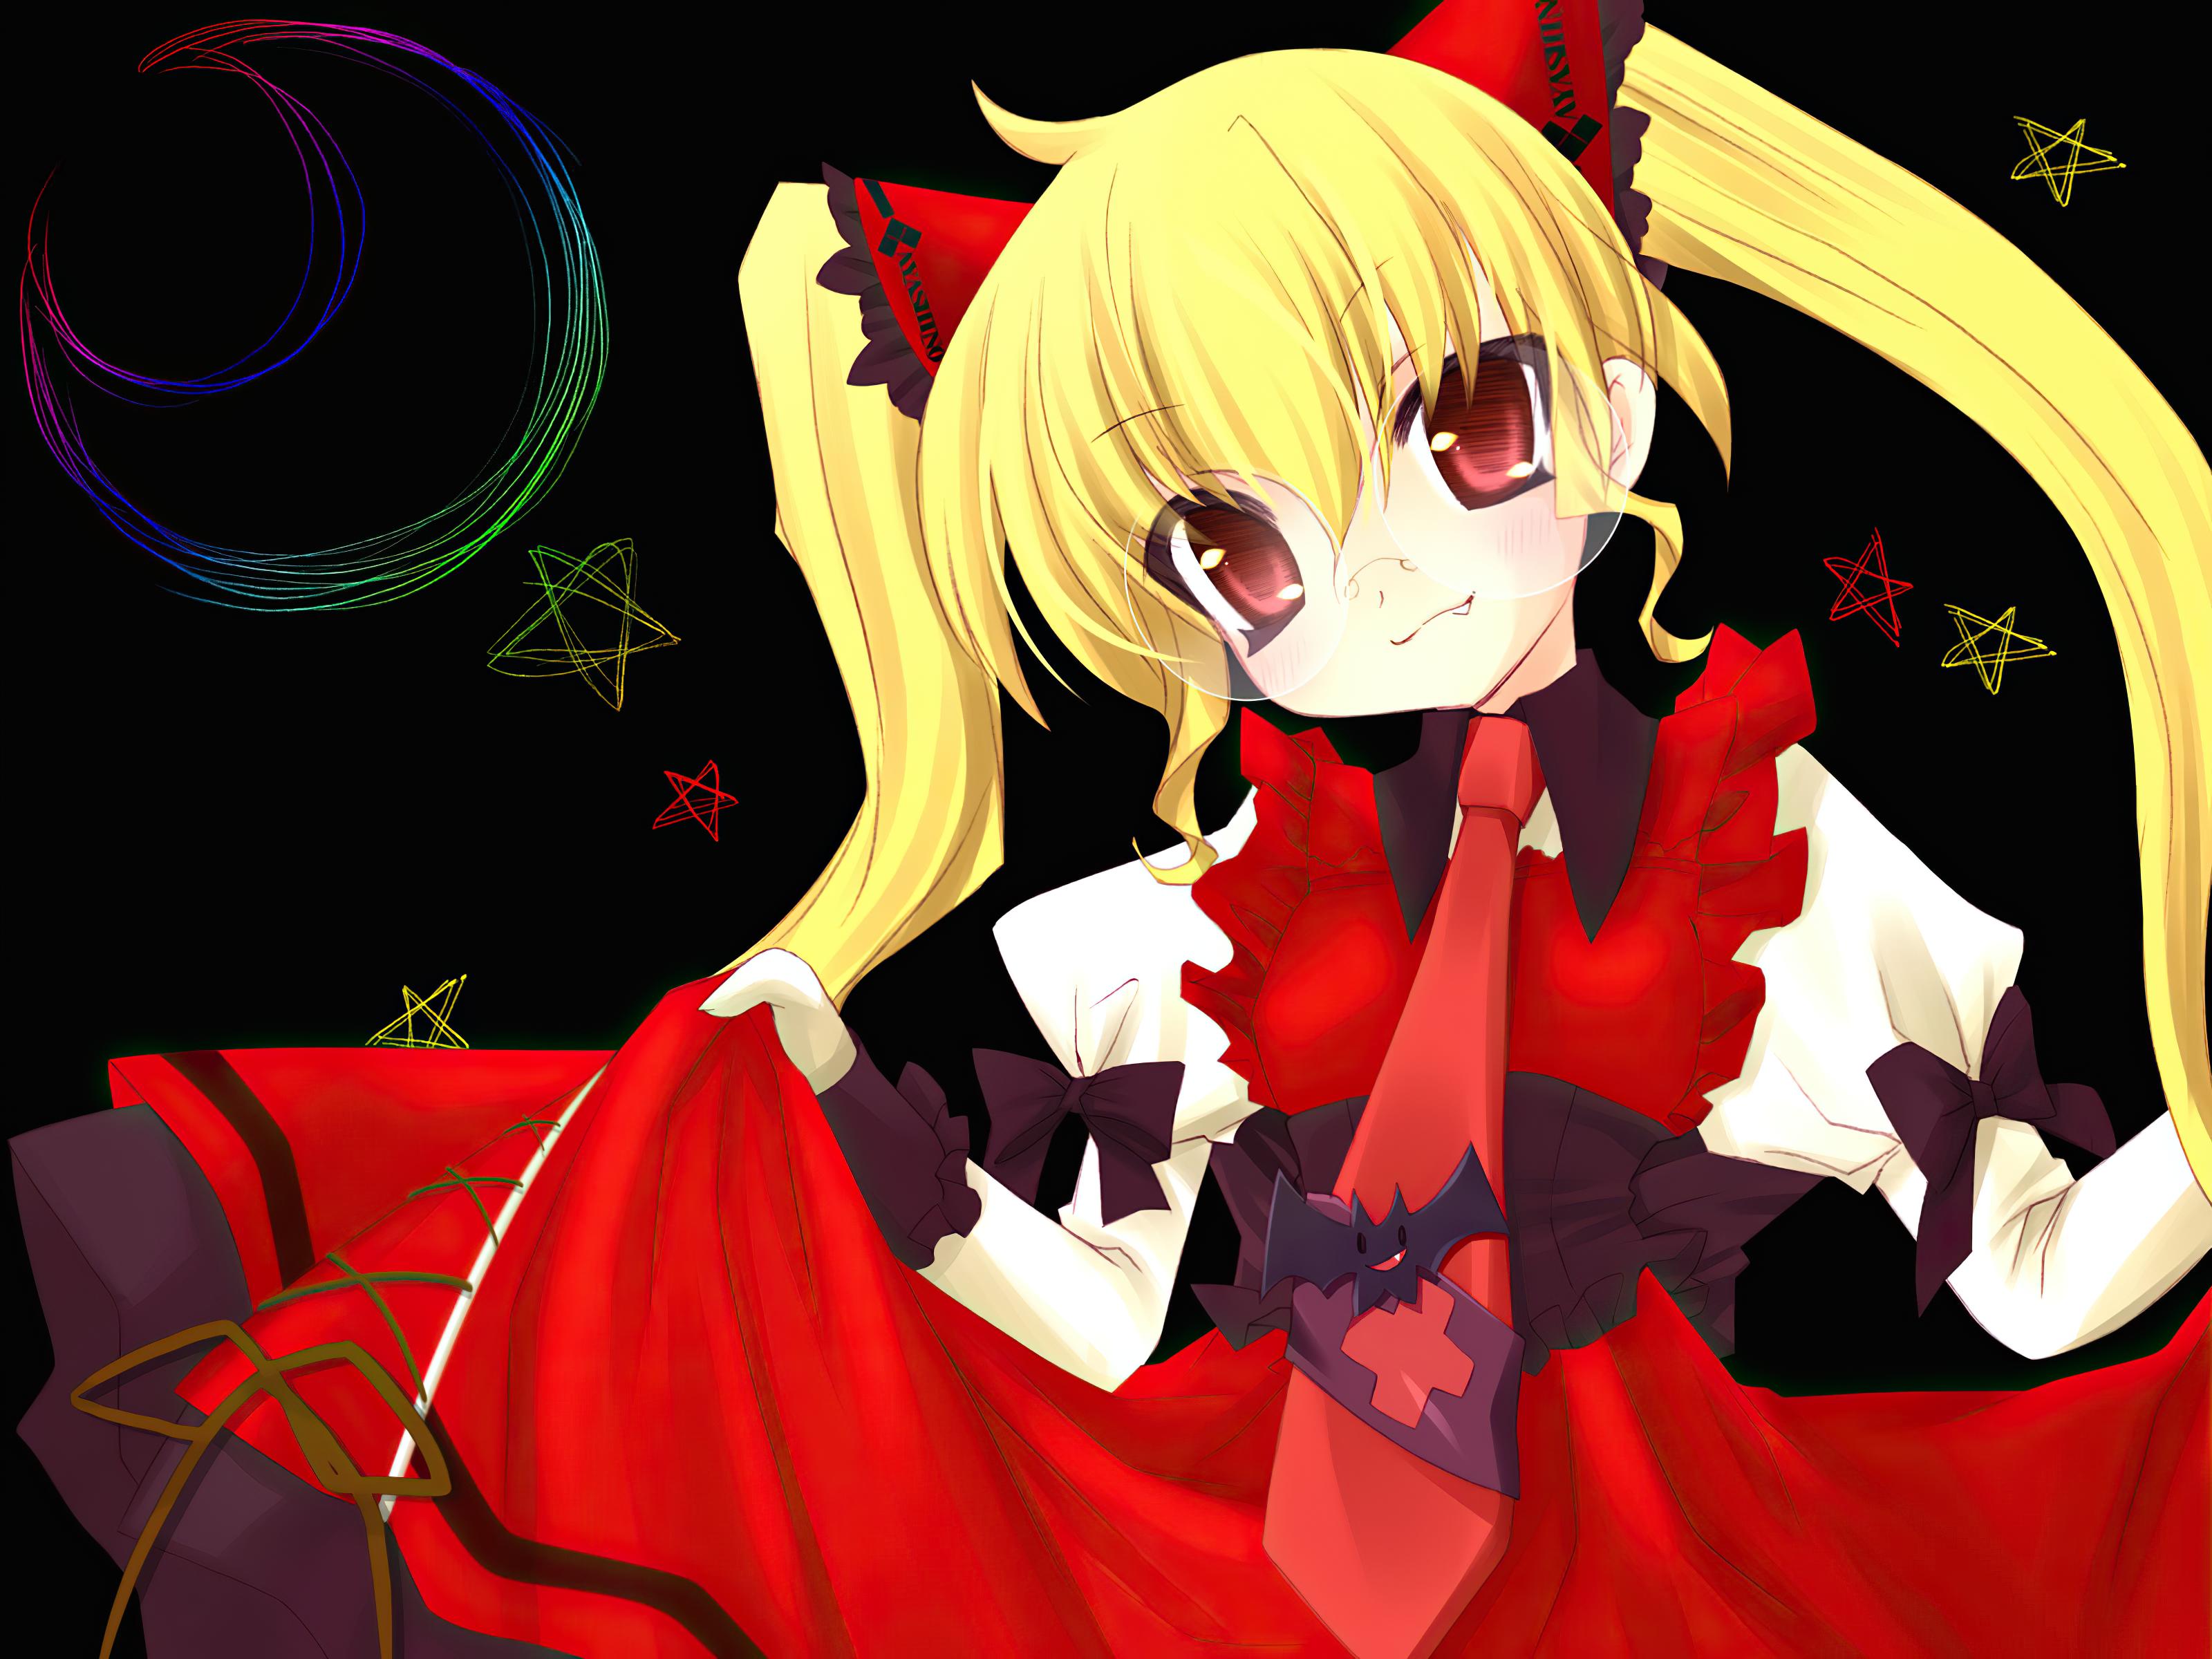 Apron Bat Blonde Glasses Red Eyes Smile Star Tie Twintails 3200x2400